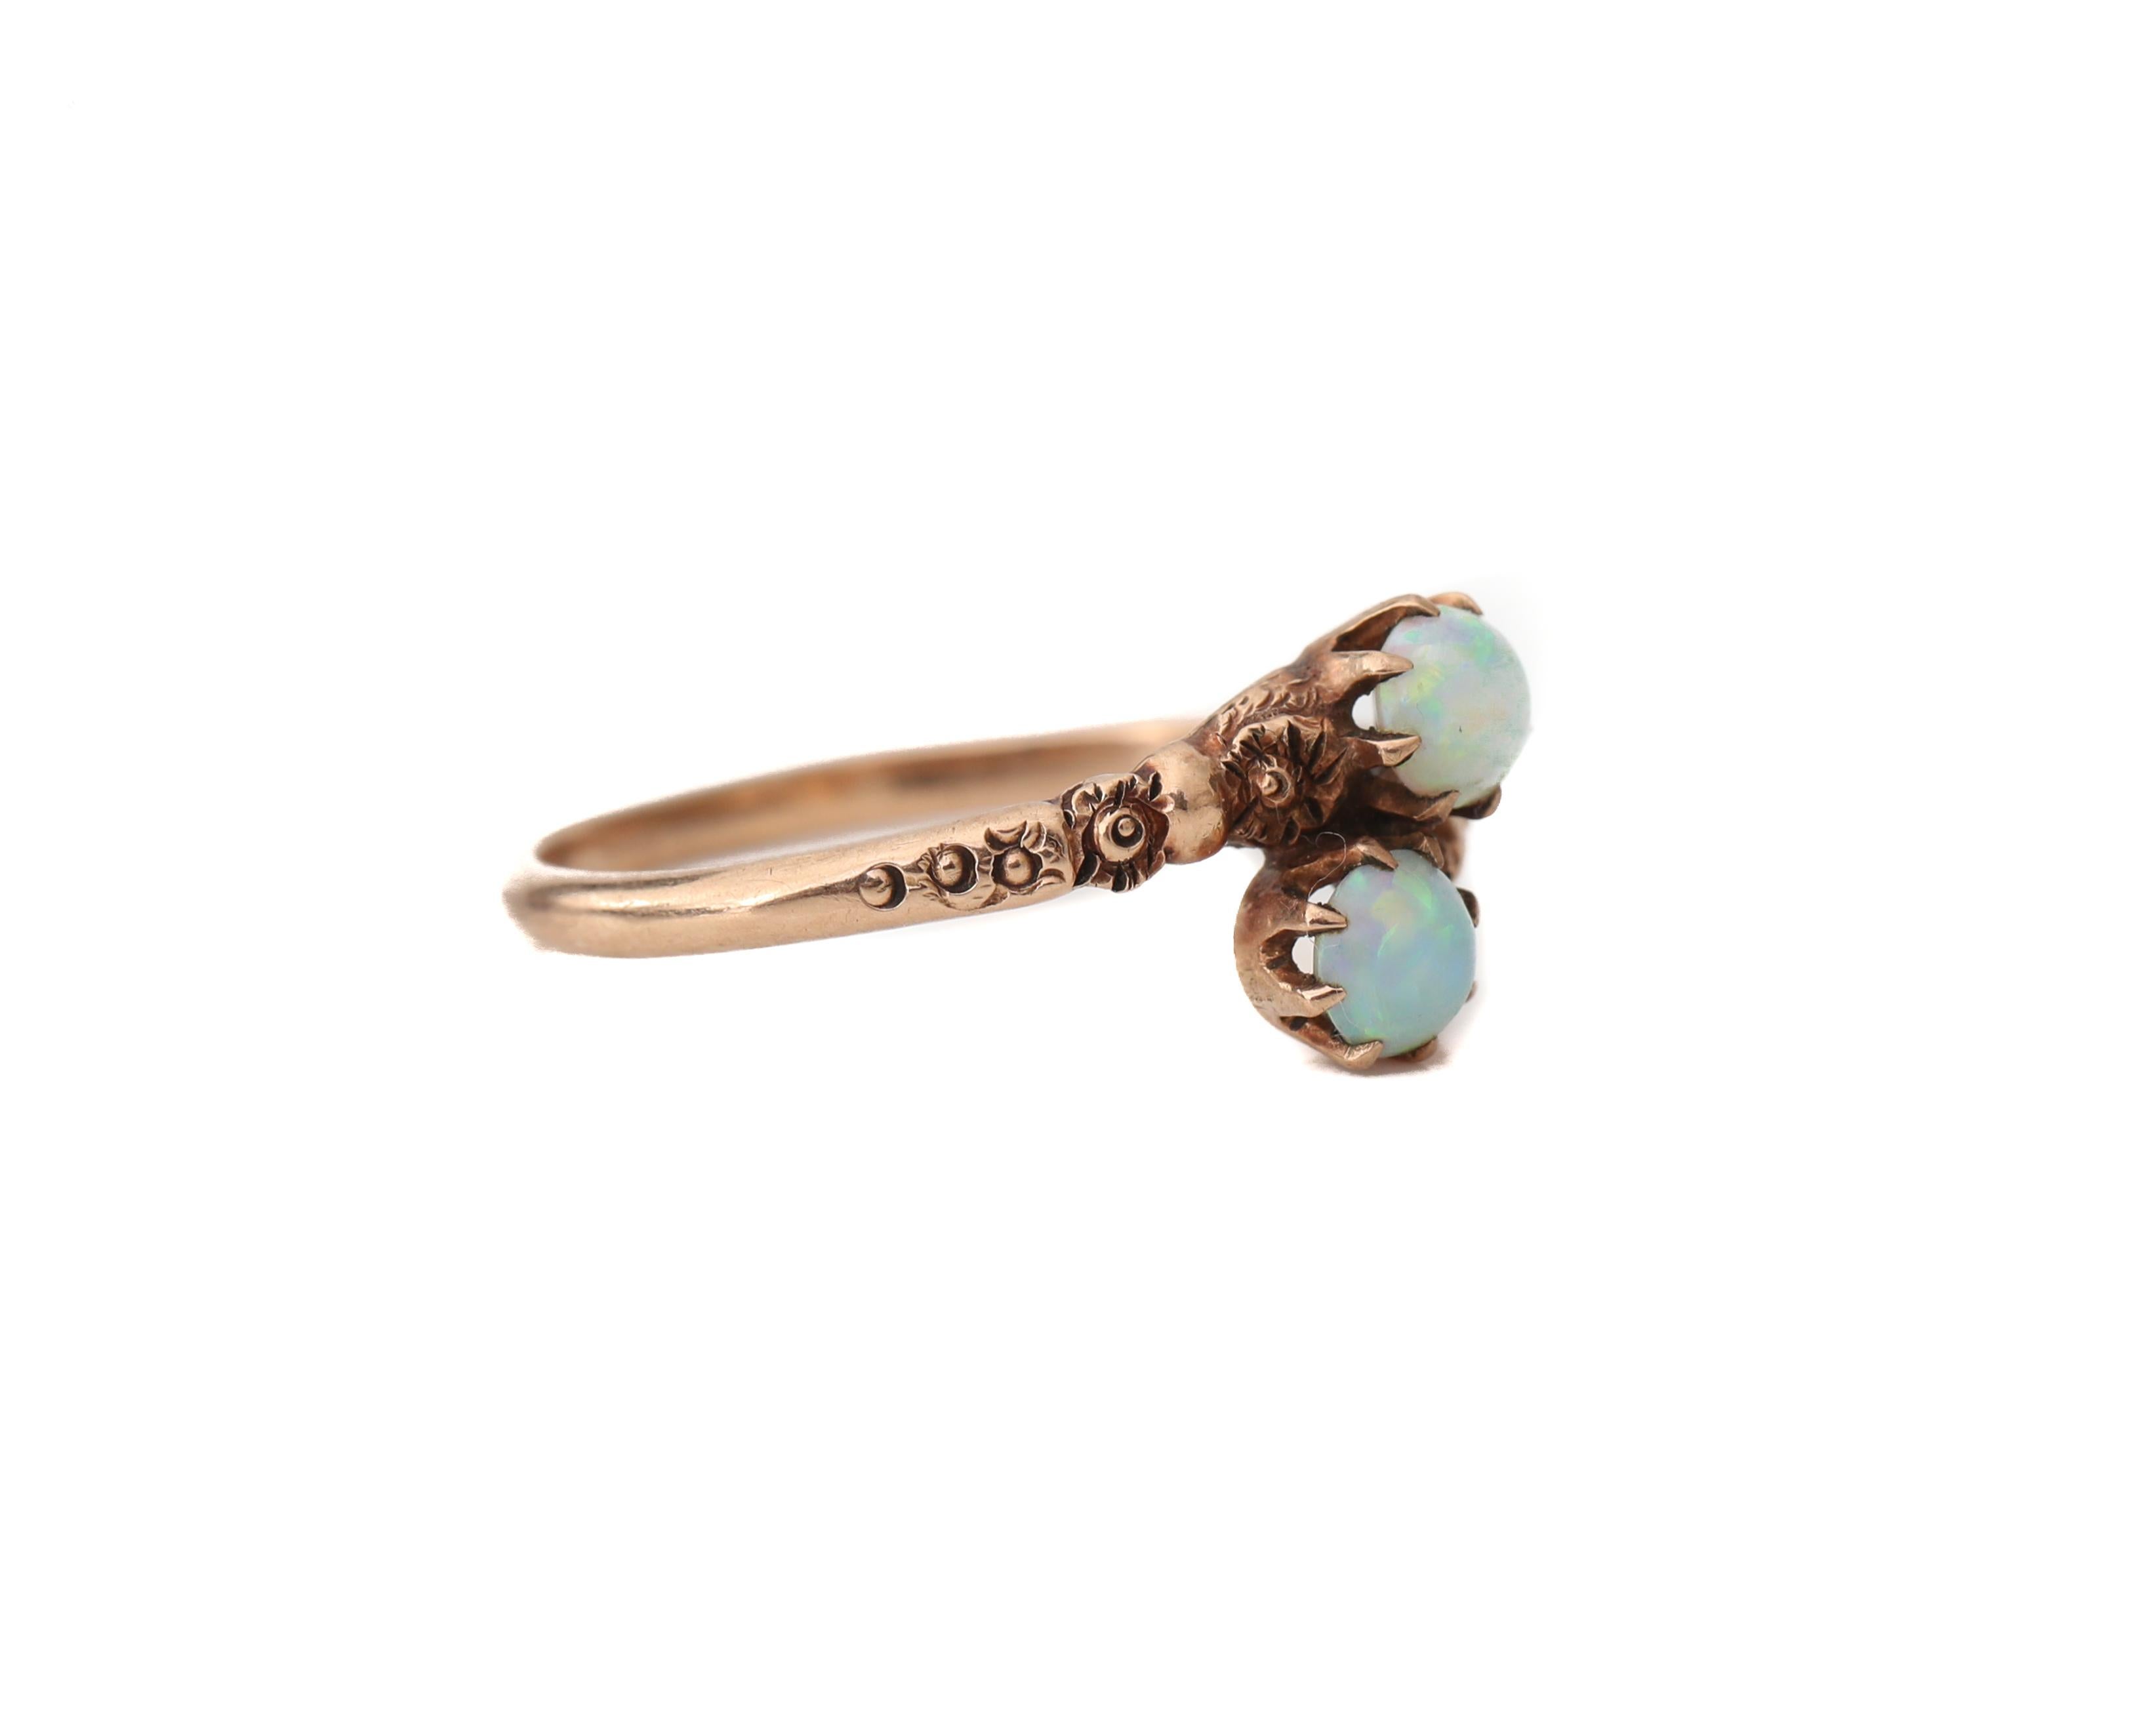 This Vintage beauty is a perfect example of an antique carved ring, hand-carved by a master jeweler in the 1920's. The two radiant opals steal the show! Intense flashes of green over a humble greyish sky blue are magical! 

This is a true antique